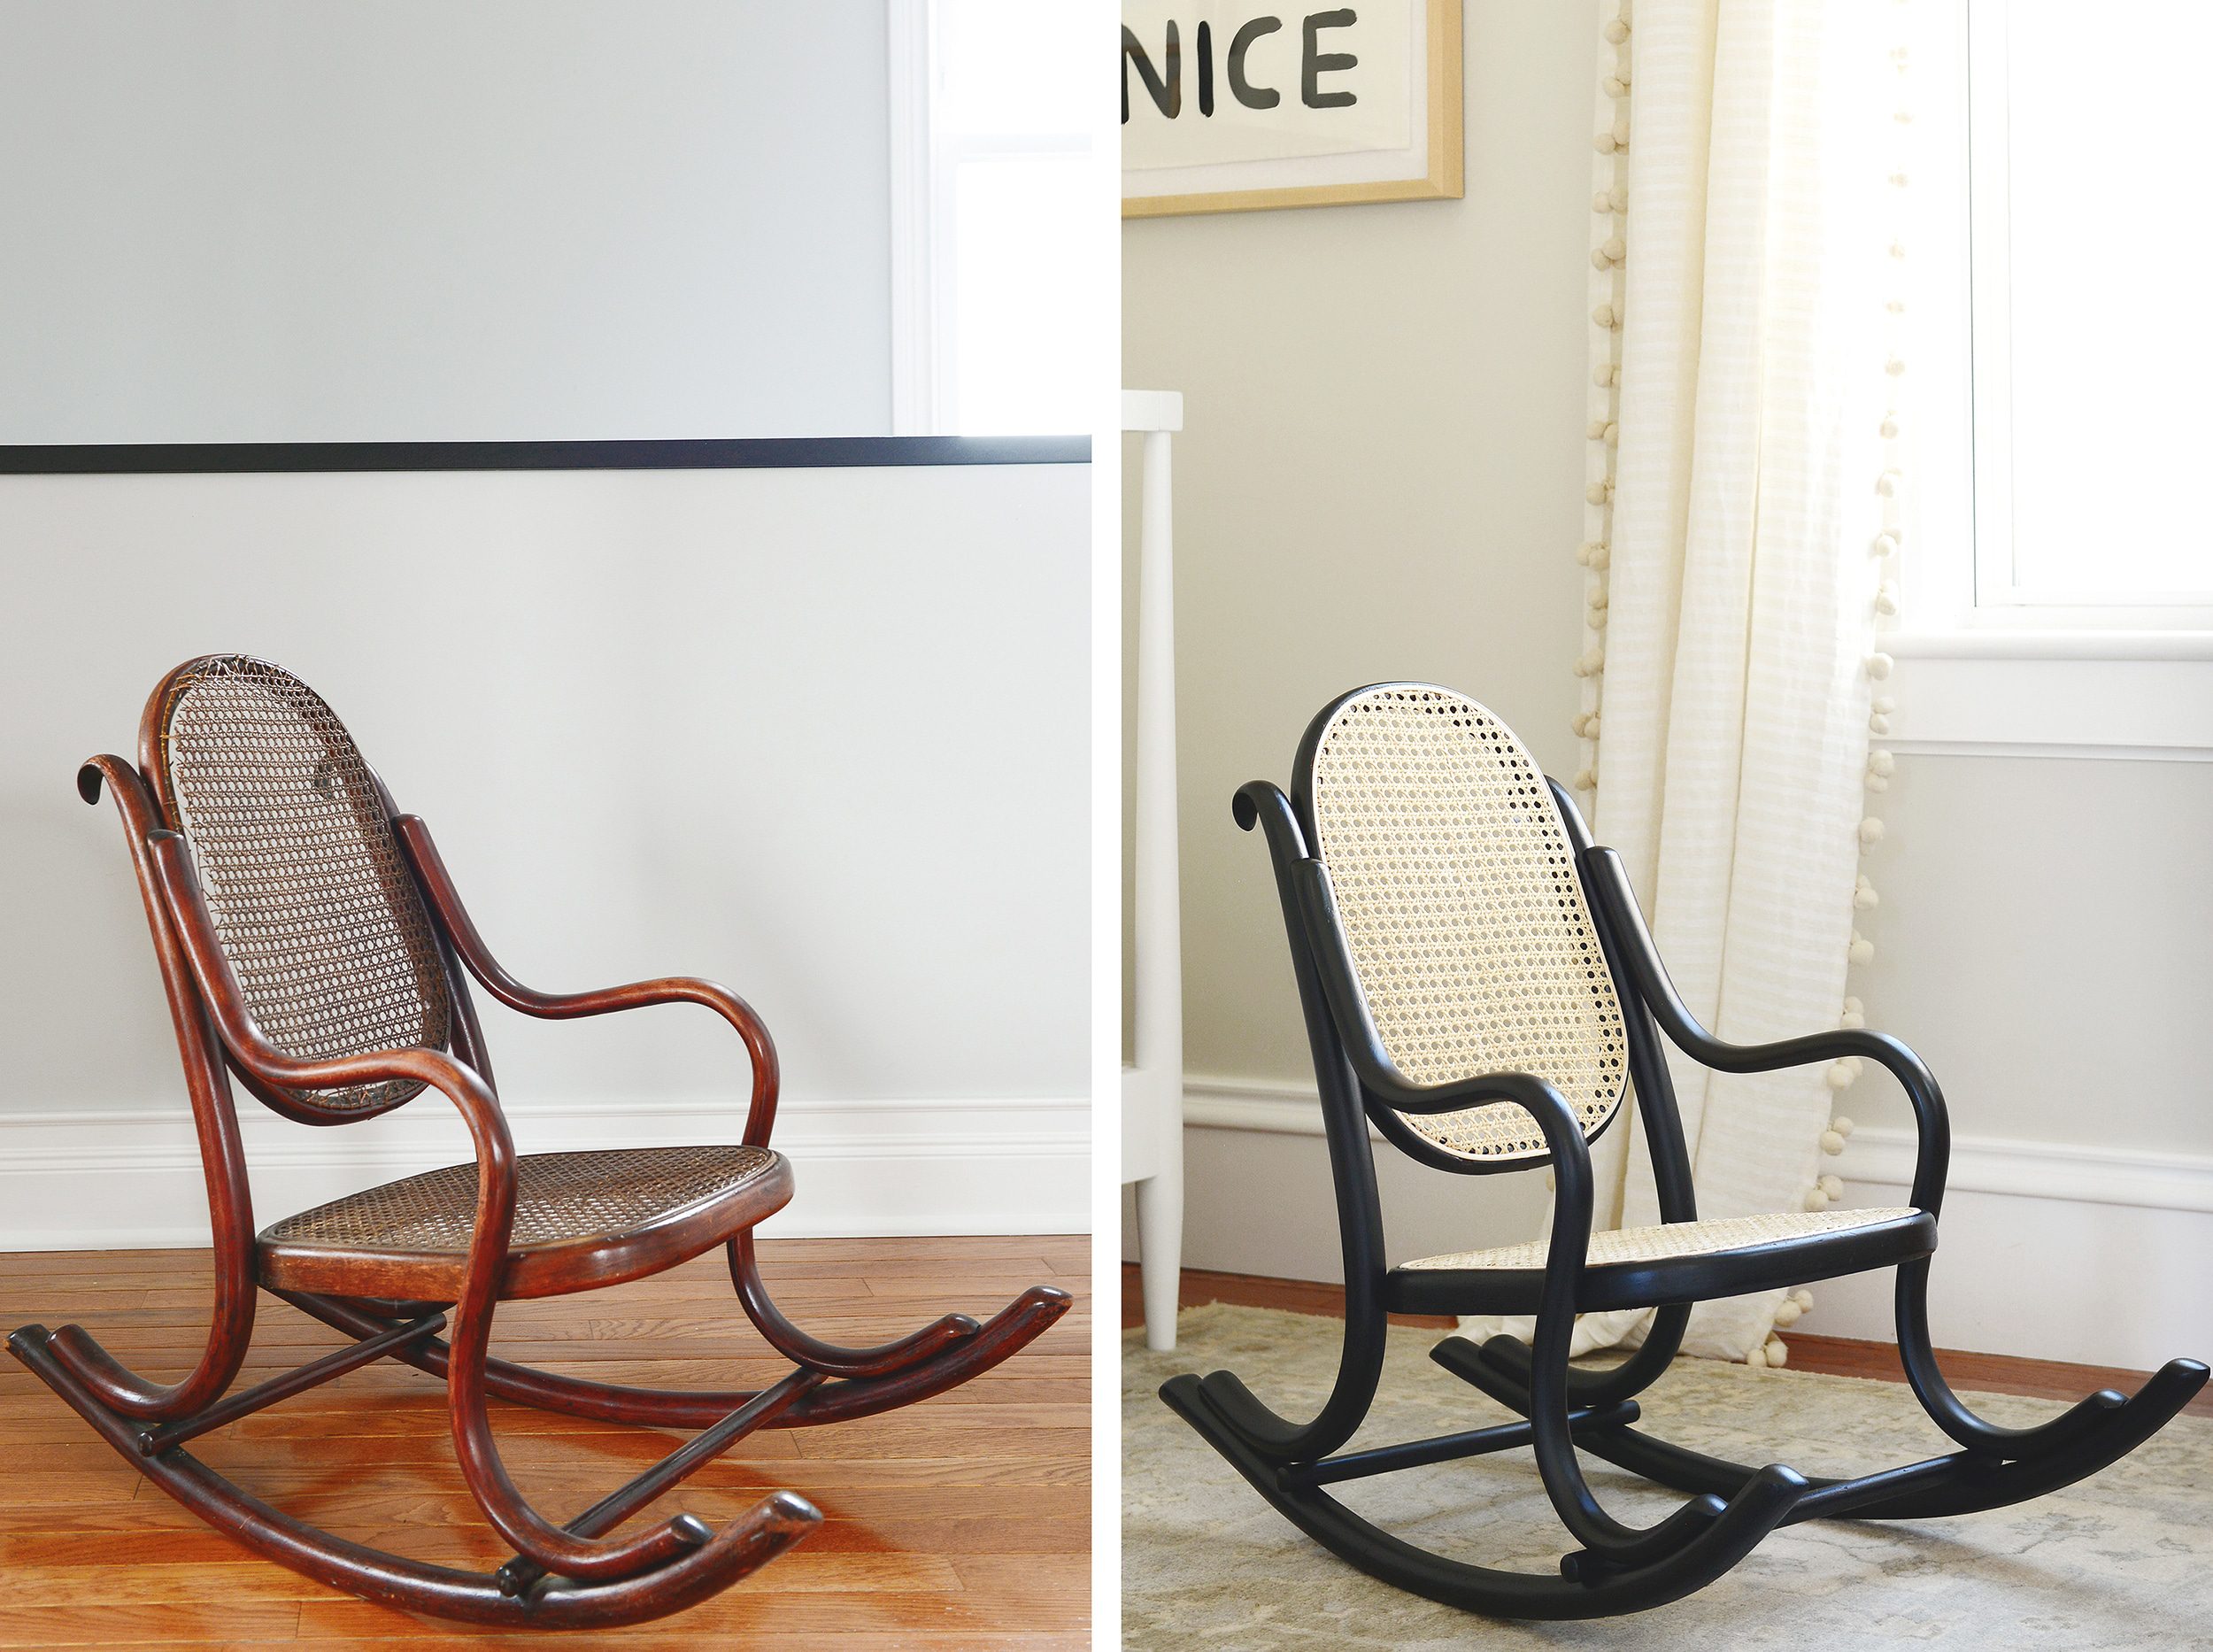 Recaning and painting a vintage rocking chair // via yellow brick home